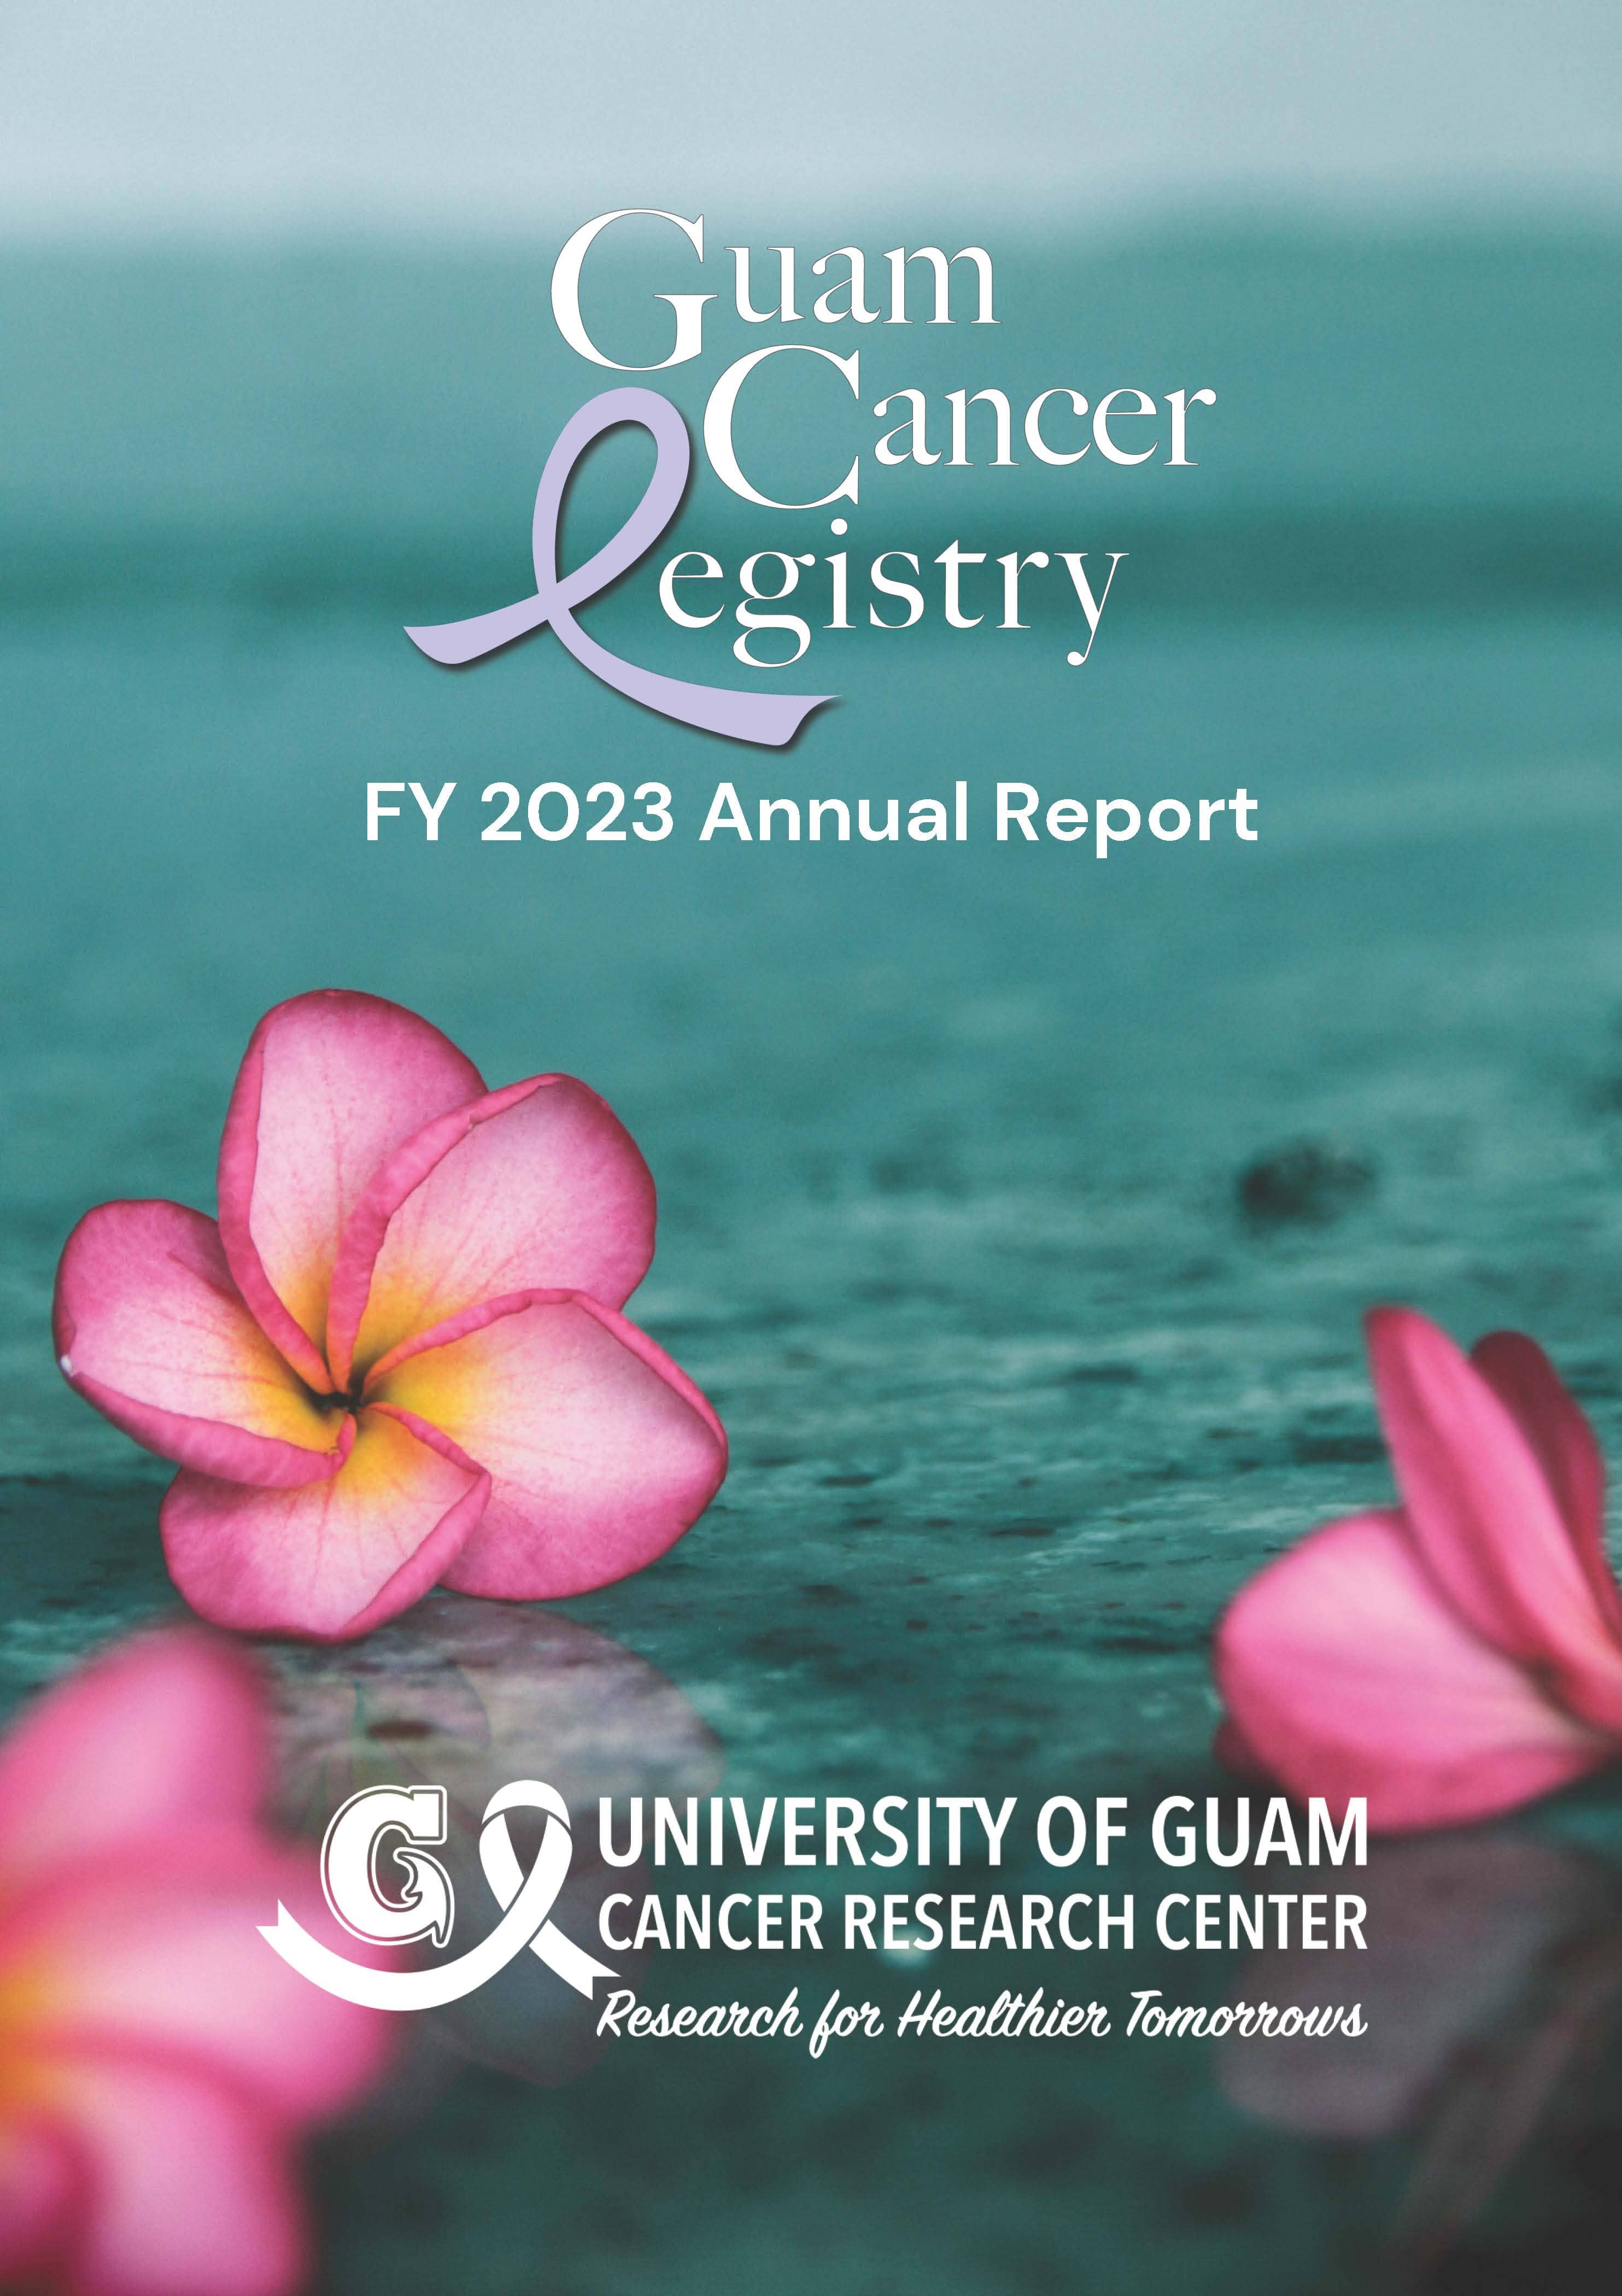 GCR FY 2023 Annual Report Cover